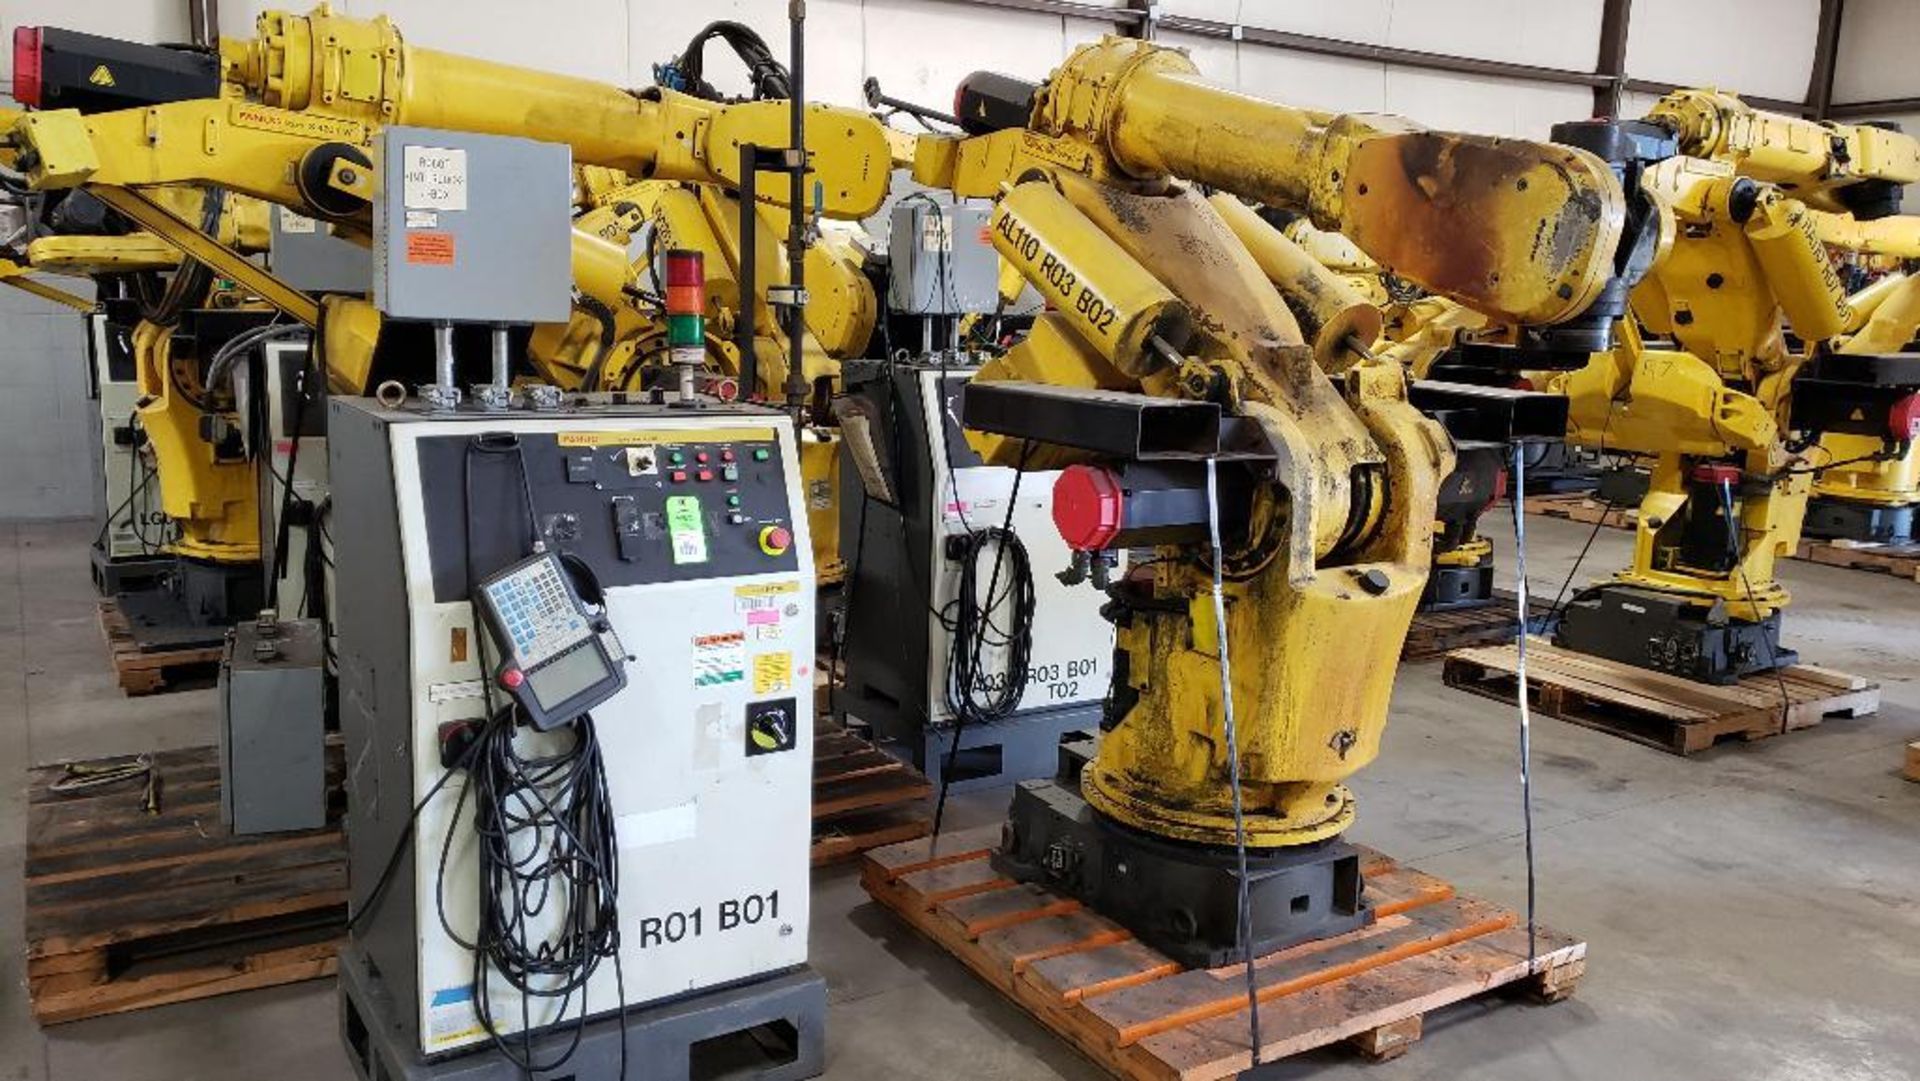 Fanuc S-420iW robot with R-J2 controller.